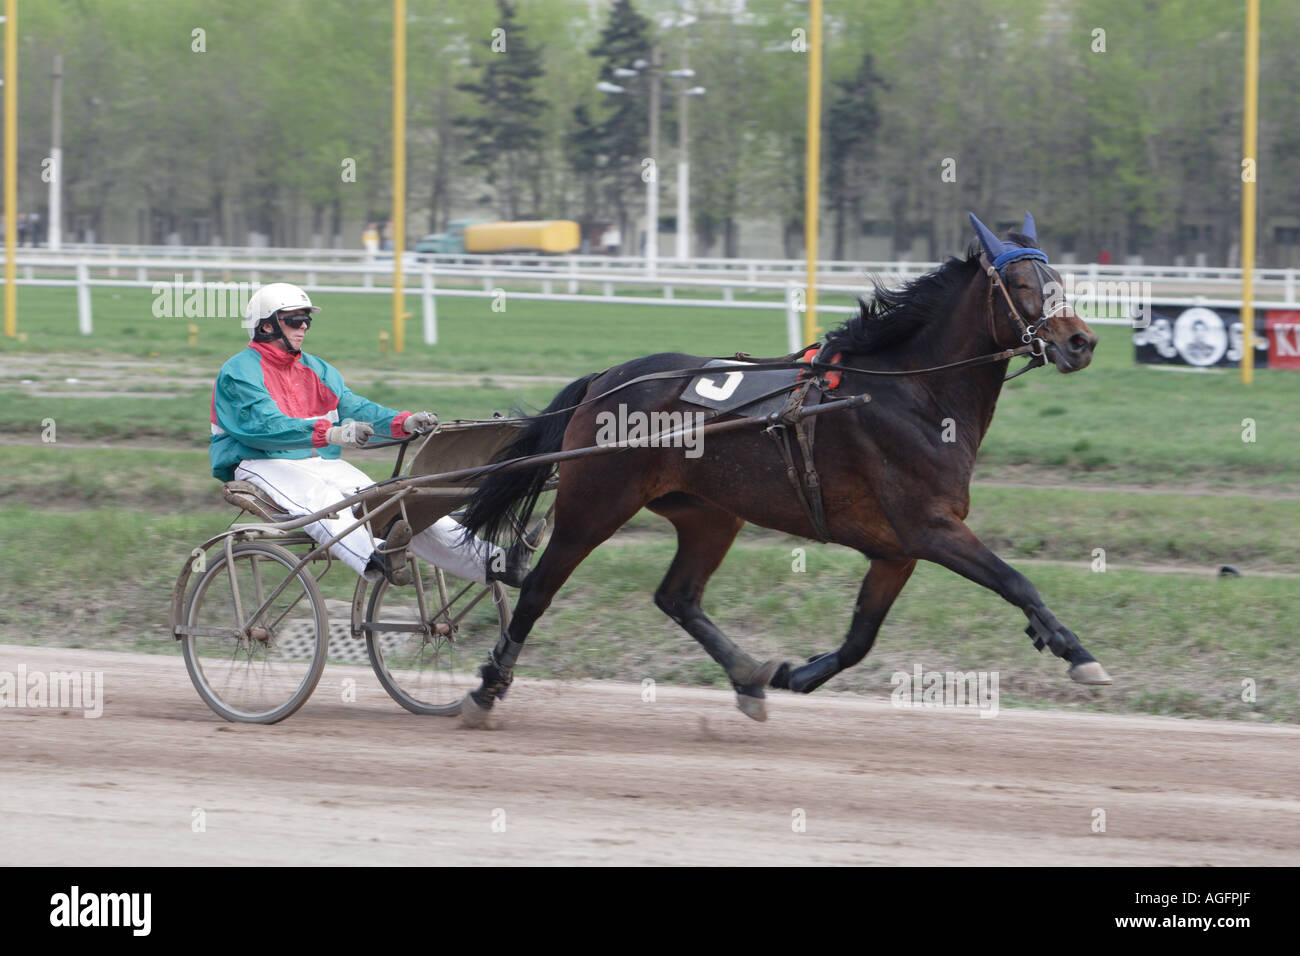 Harness racing is also popular in the eastern. Stock Photo